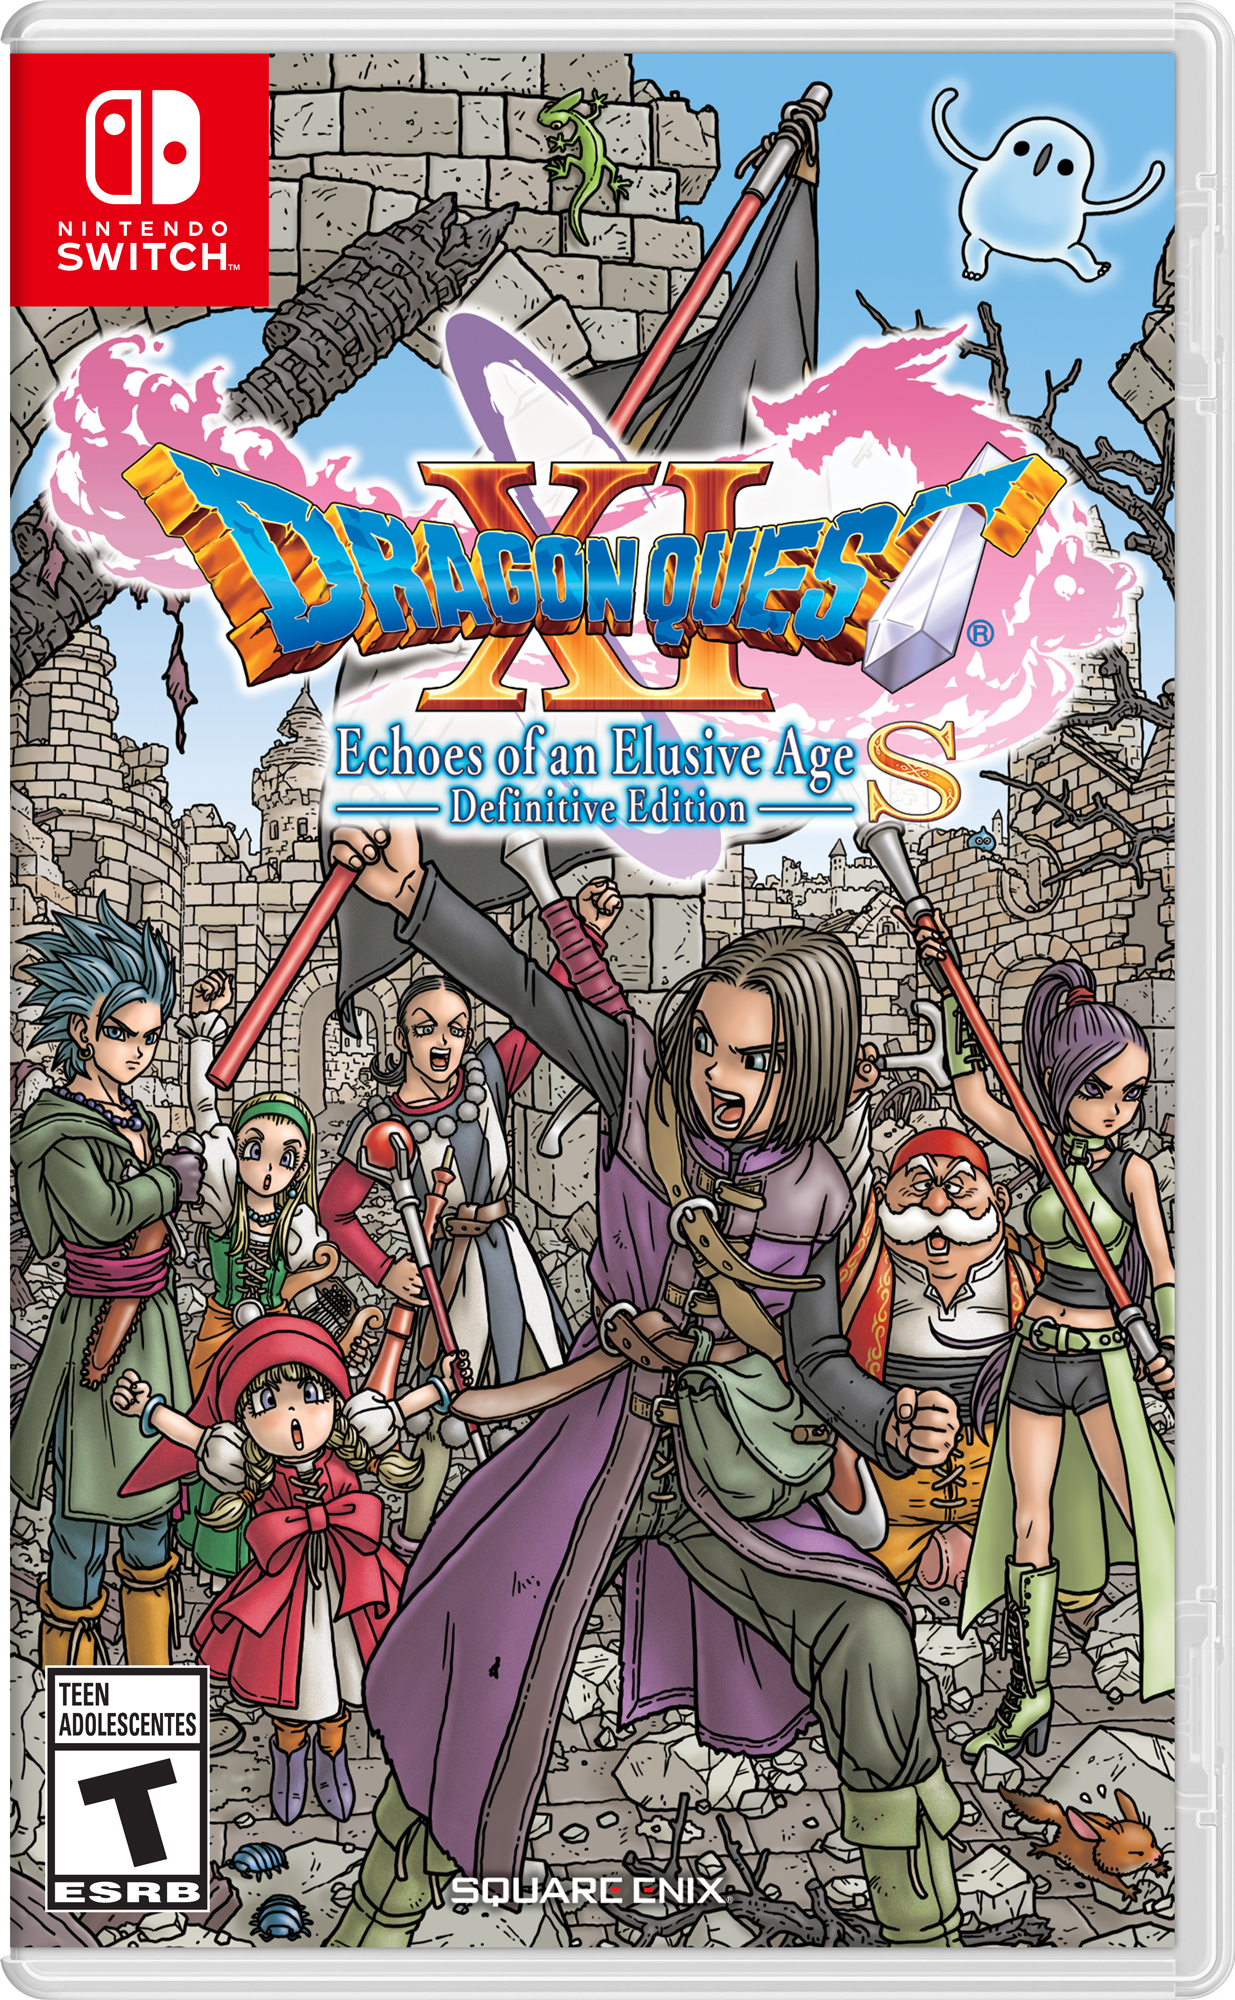 Dragon Quest XI S: Echoes of an Elusive Age - Definitive Edition, Nintendo Switch, [Physical], 886162372694 - image 1 of 14